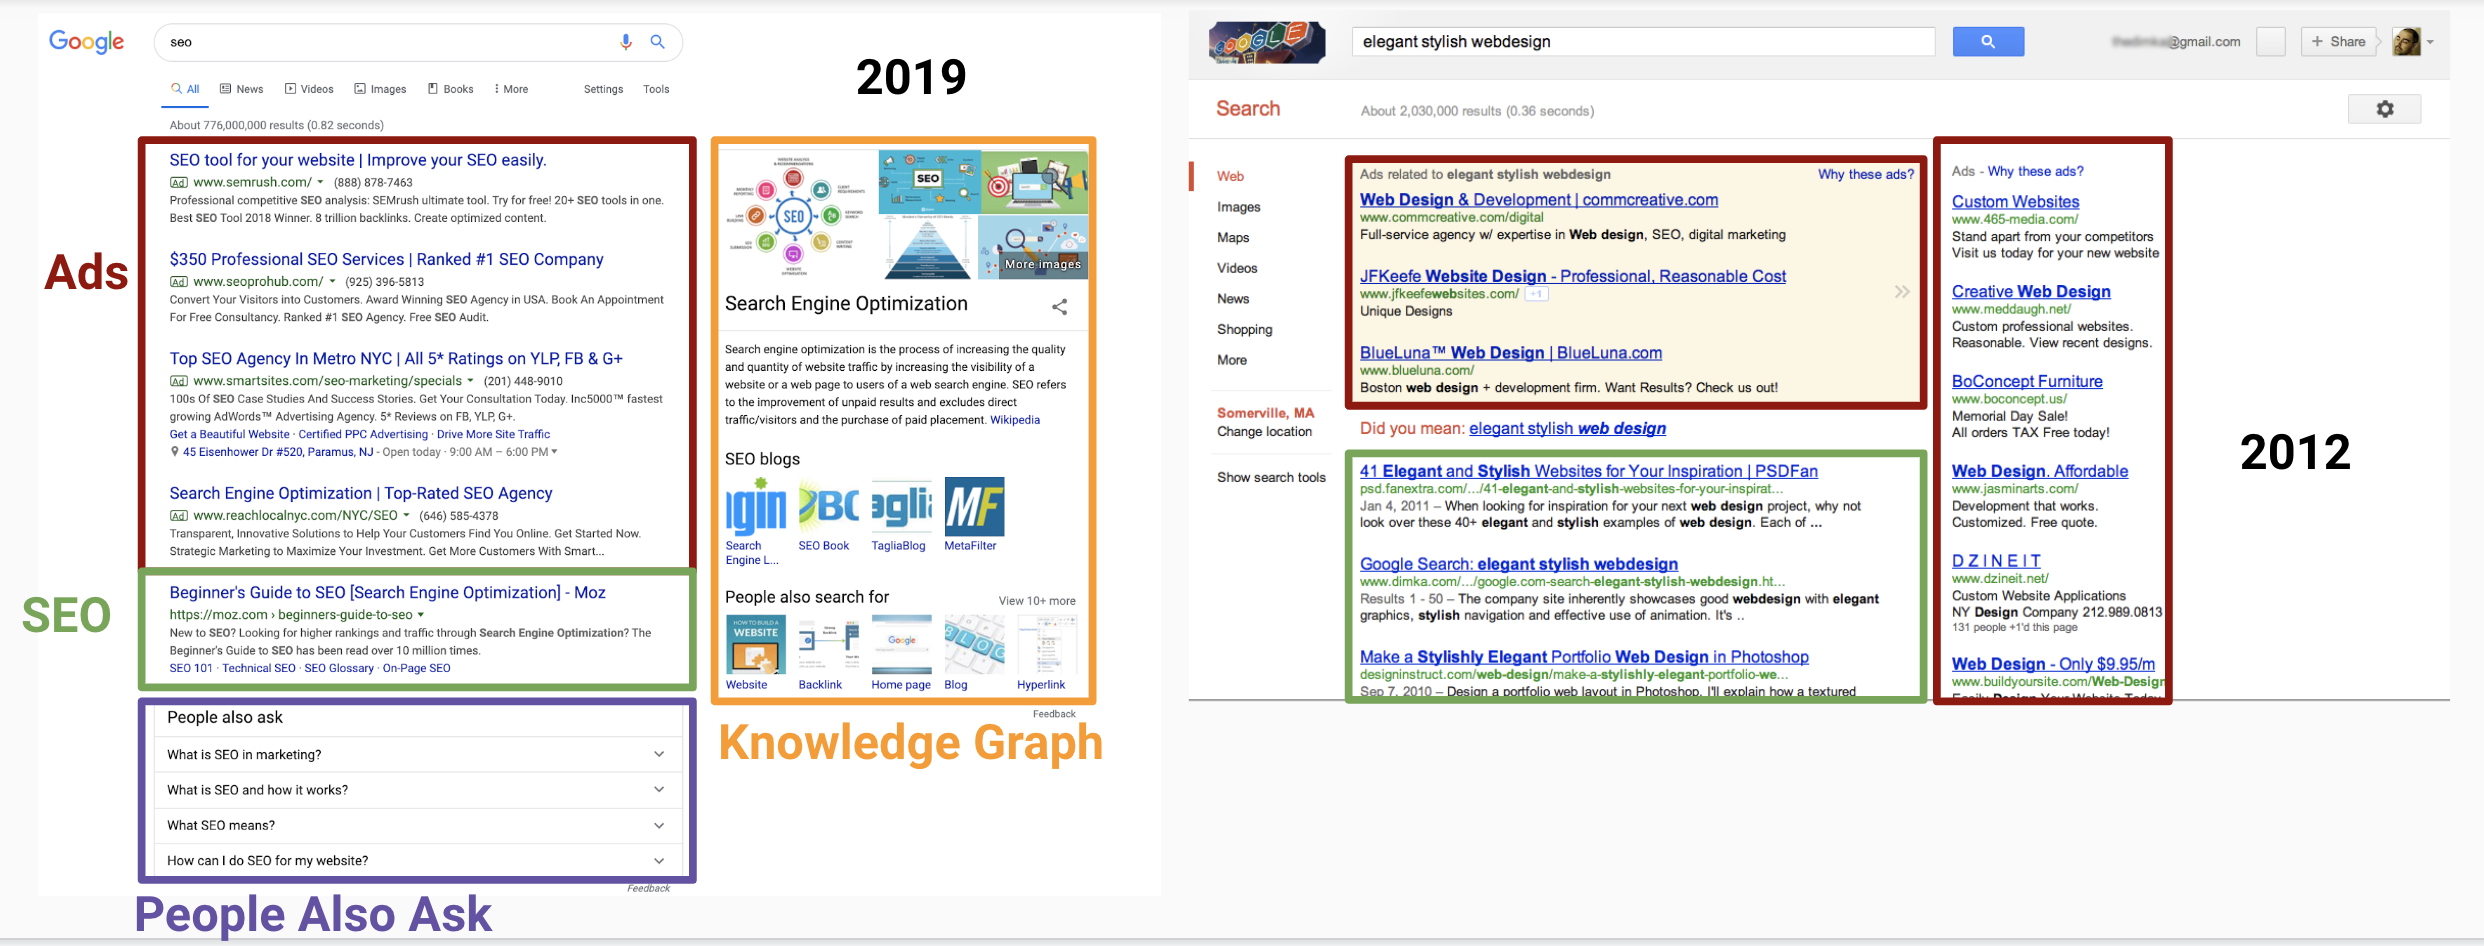 A Google search results page 2019 vs one in 2012